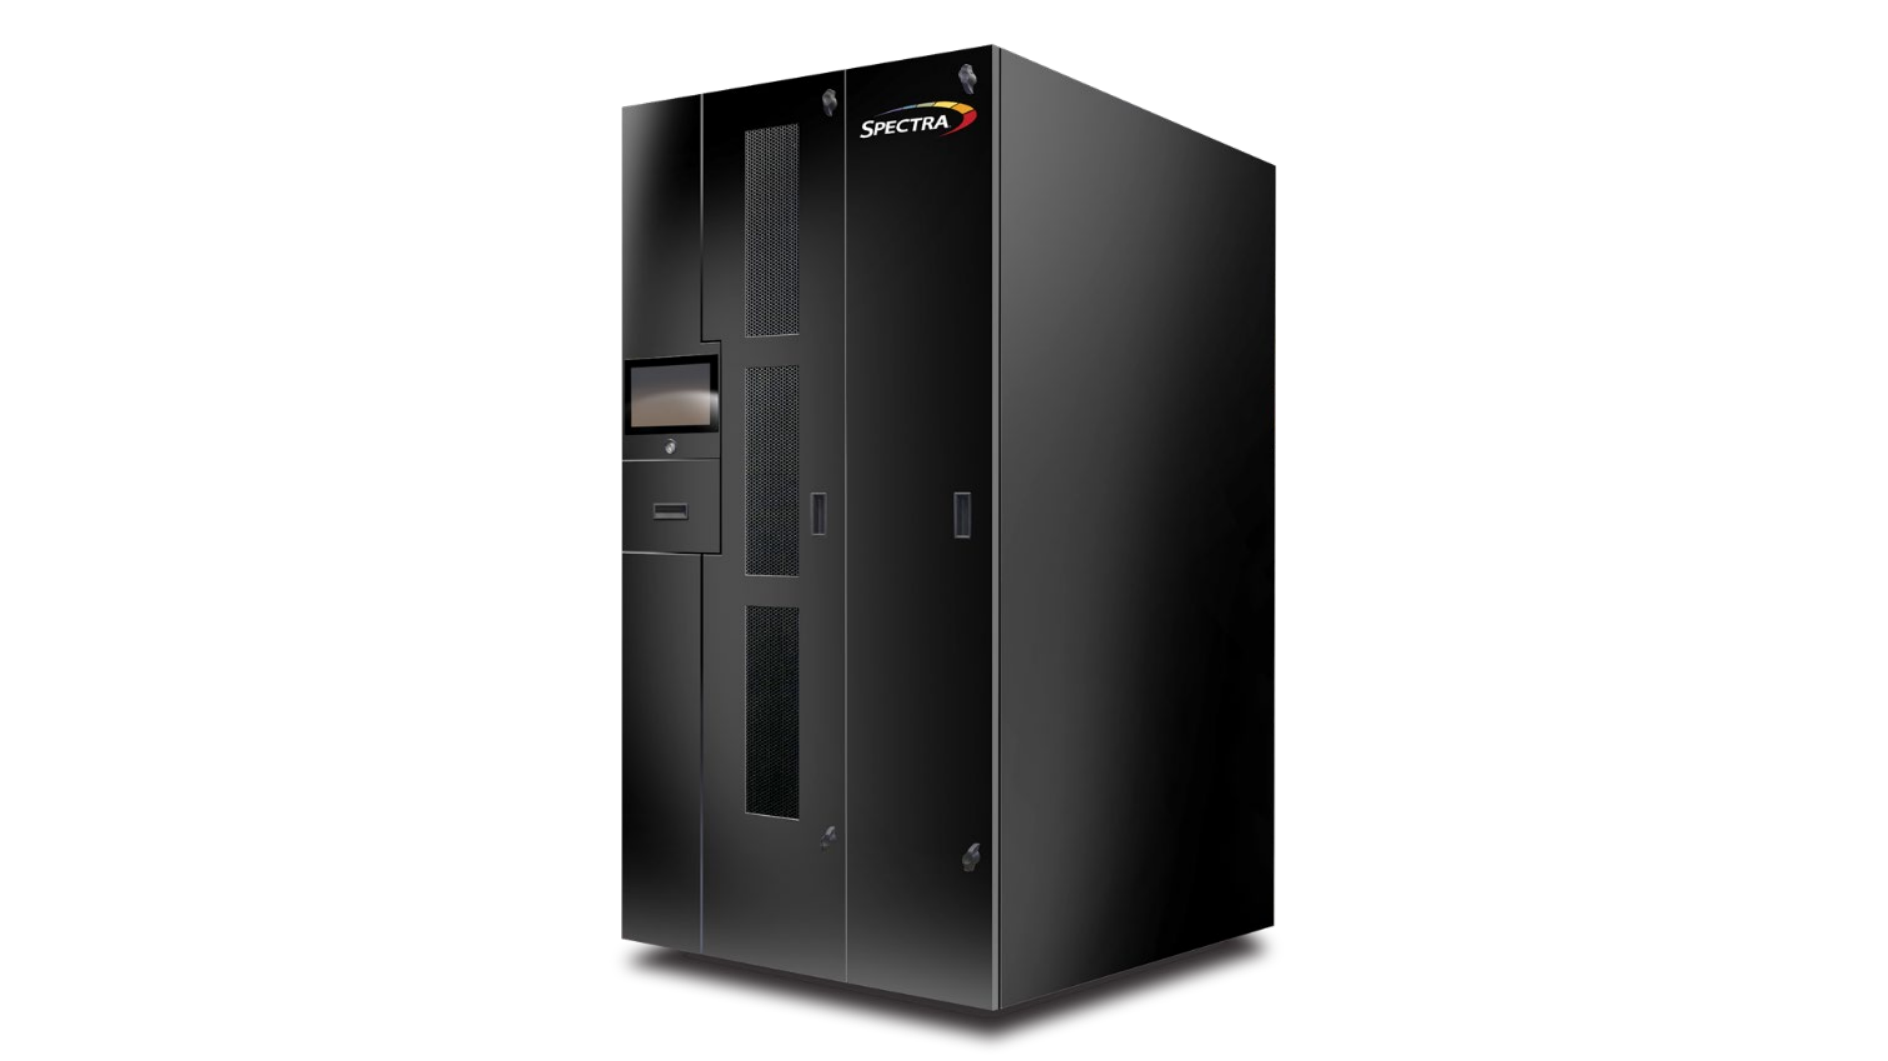 Spectra Cube heralds new 75,000 TB storage library — tape solution for cloud providers is optimized for ease of use and versatility